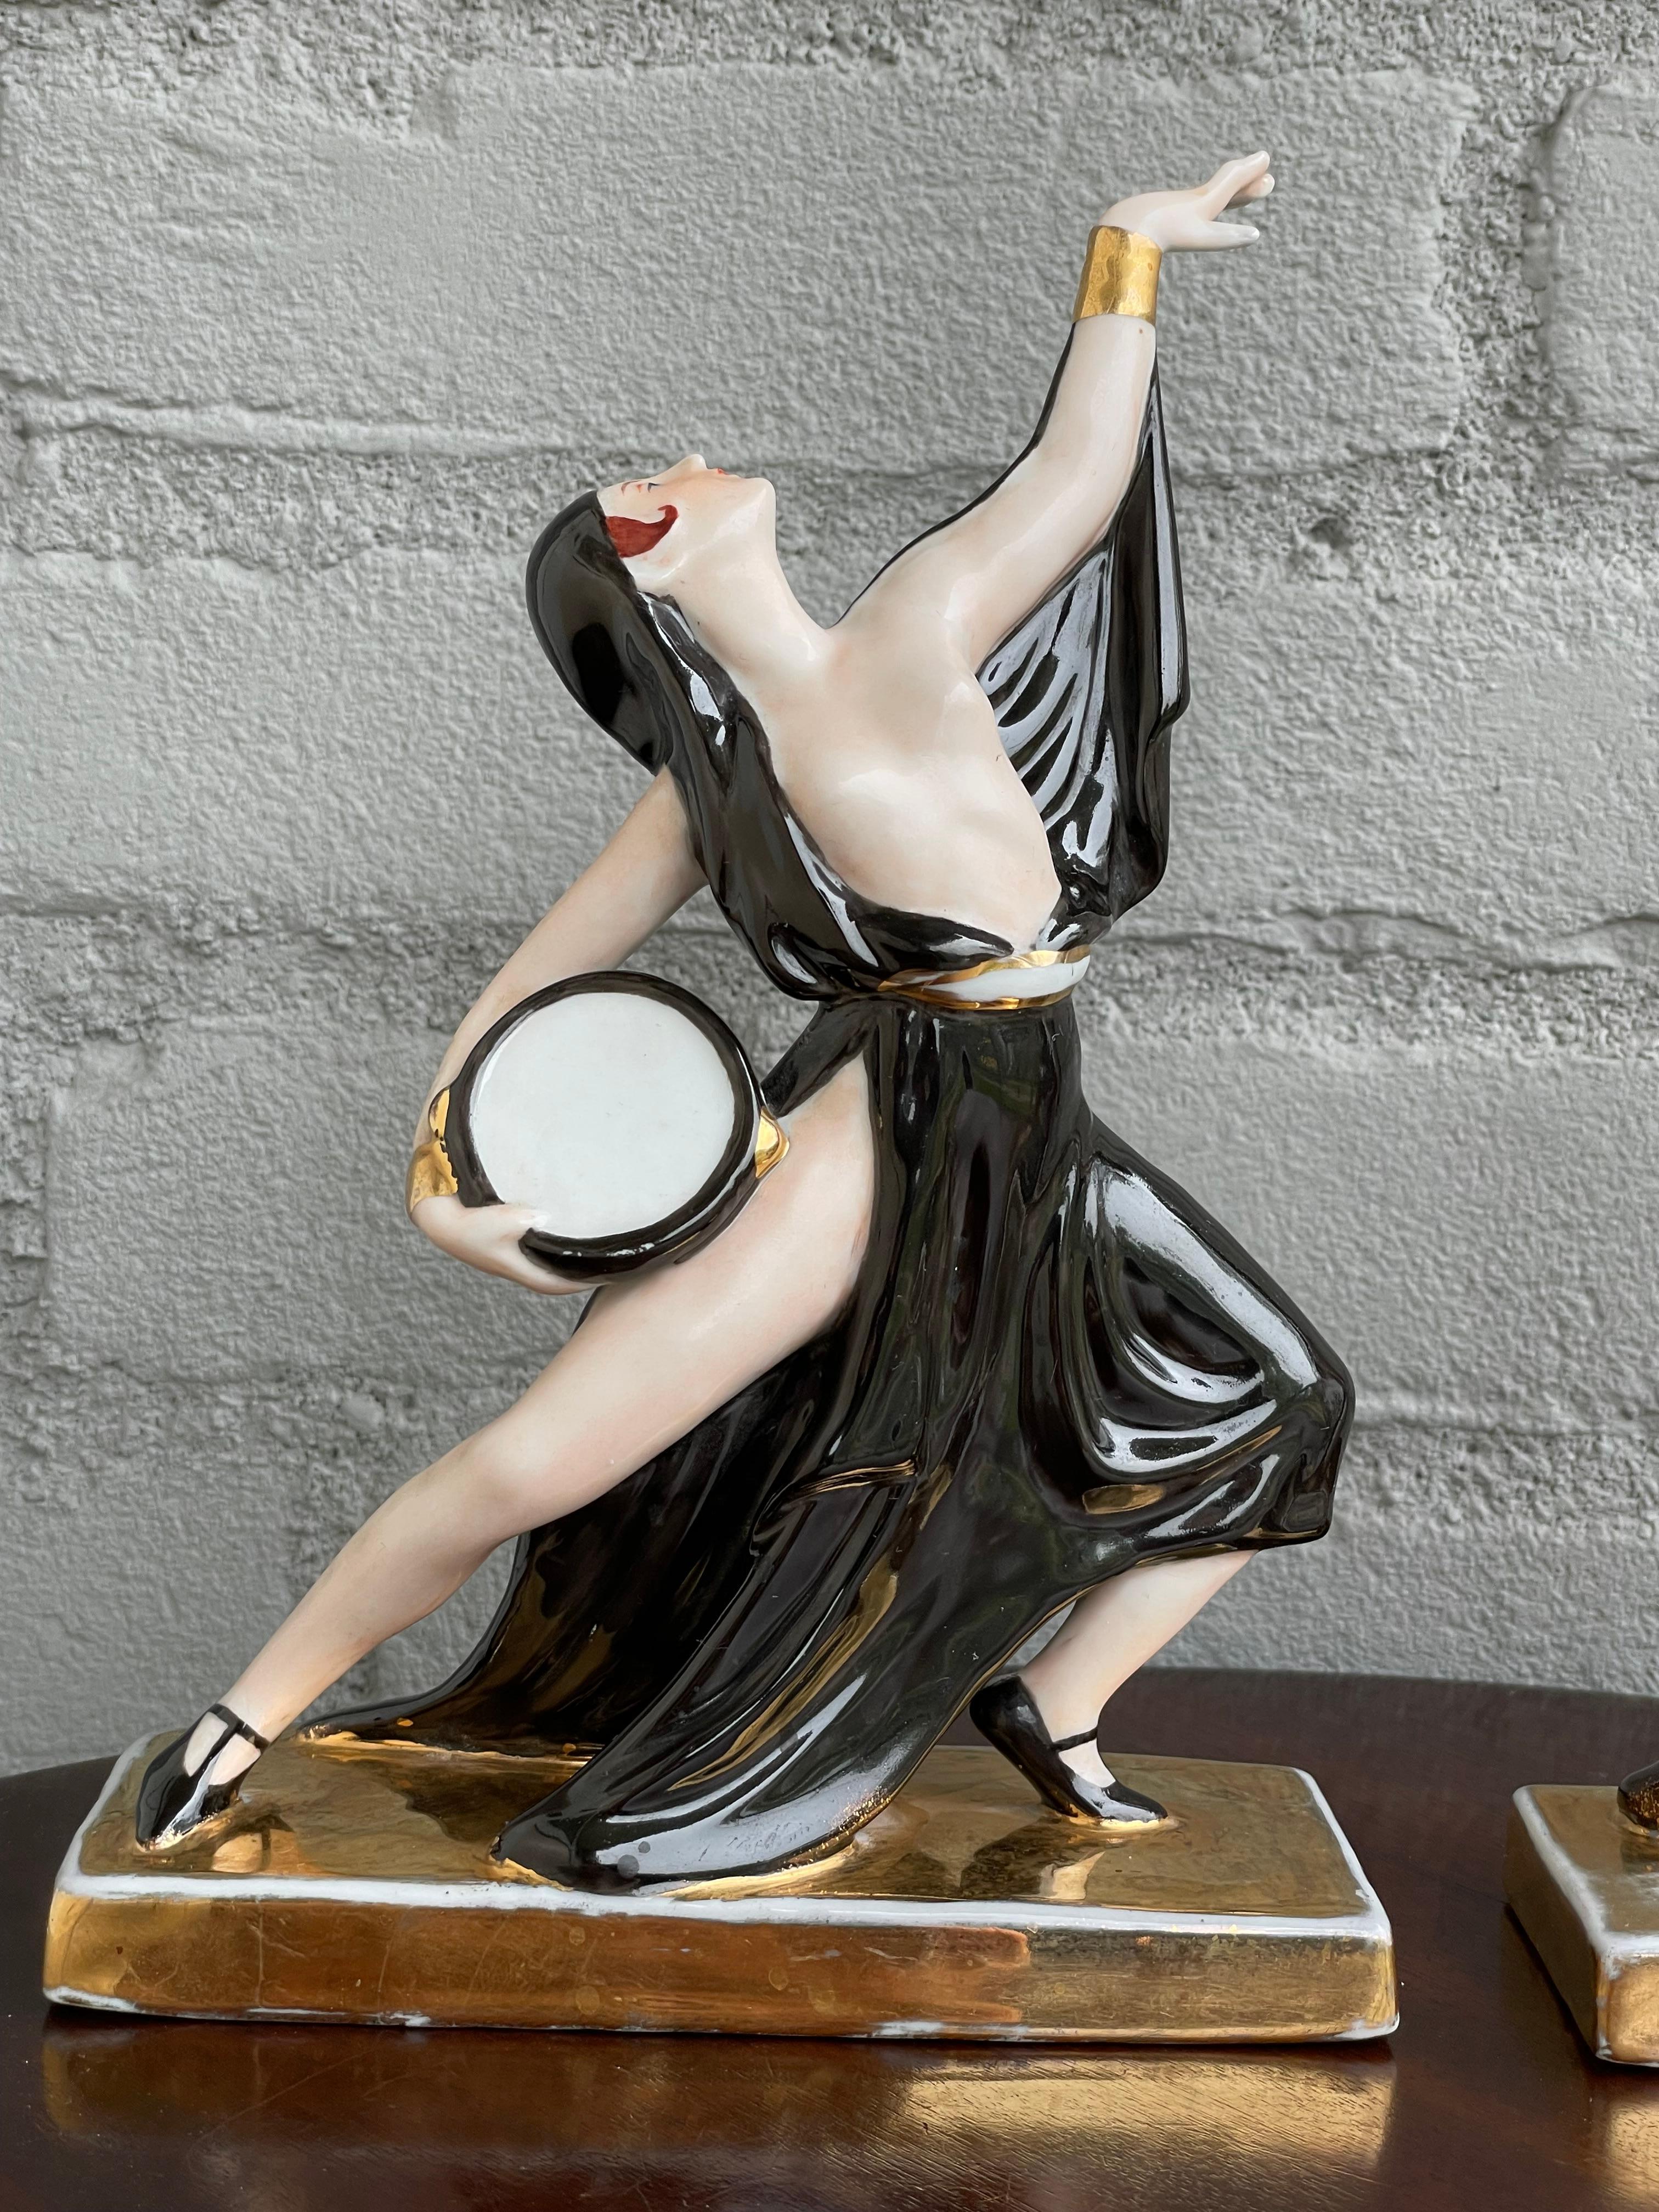 Ceramic Rare & Stylish Pair of 1920s Porcelain French Art Deco Risque Dancer Bookends For Sale